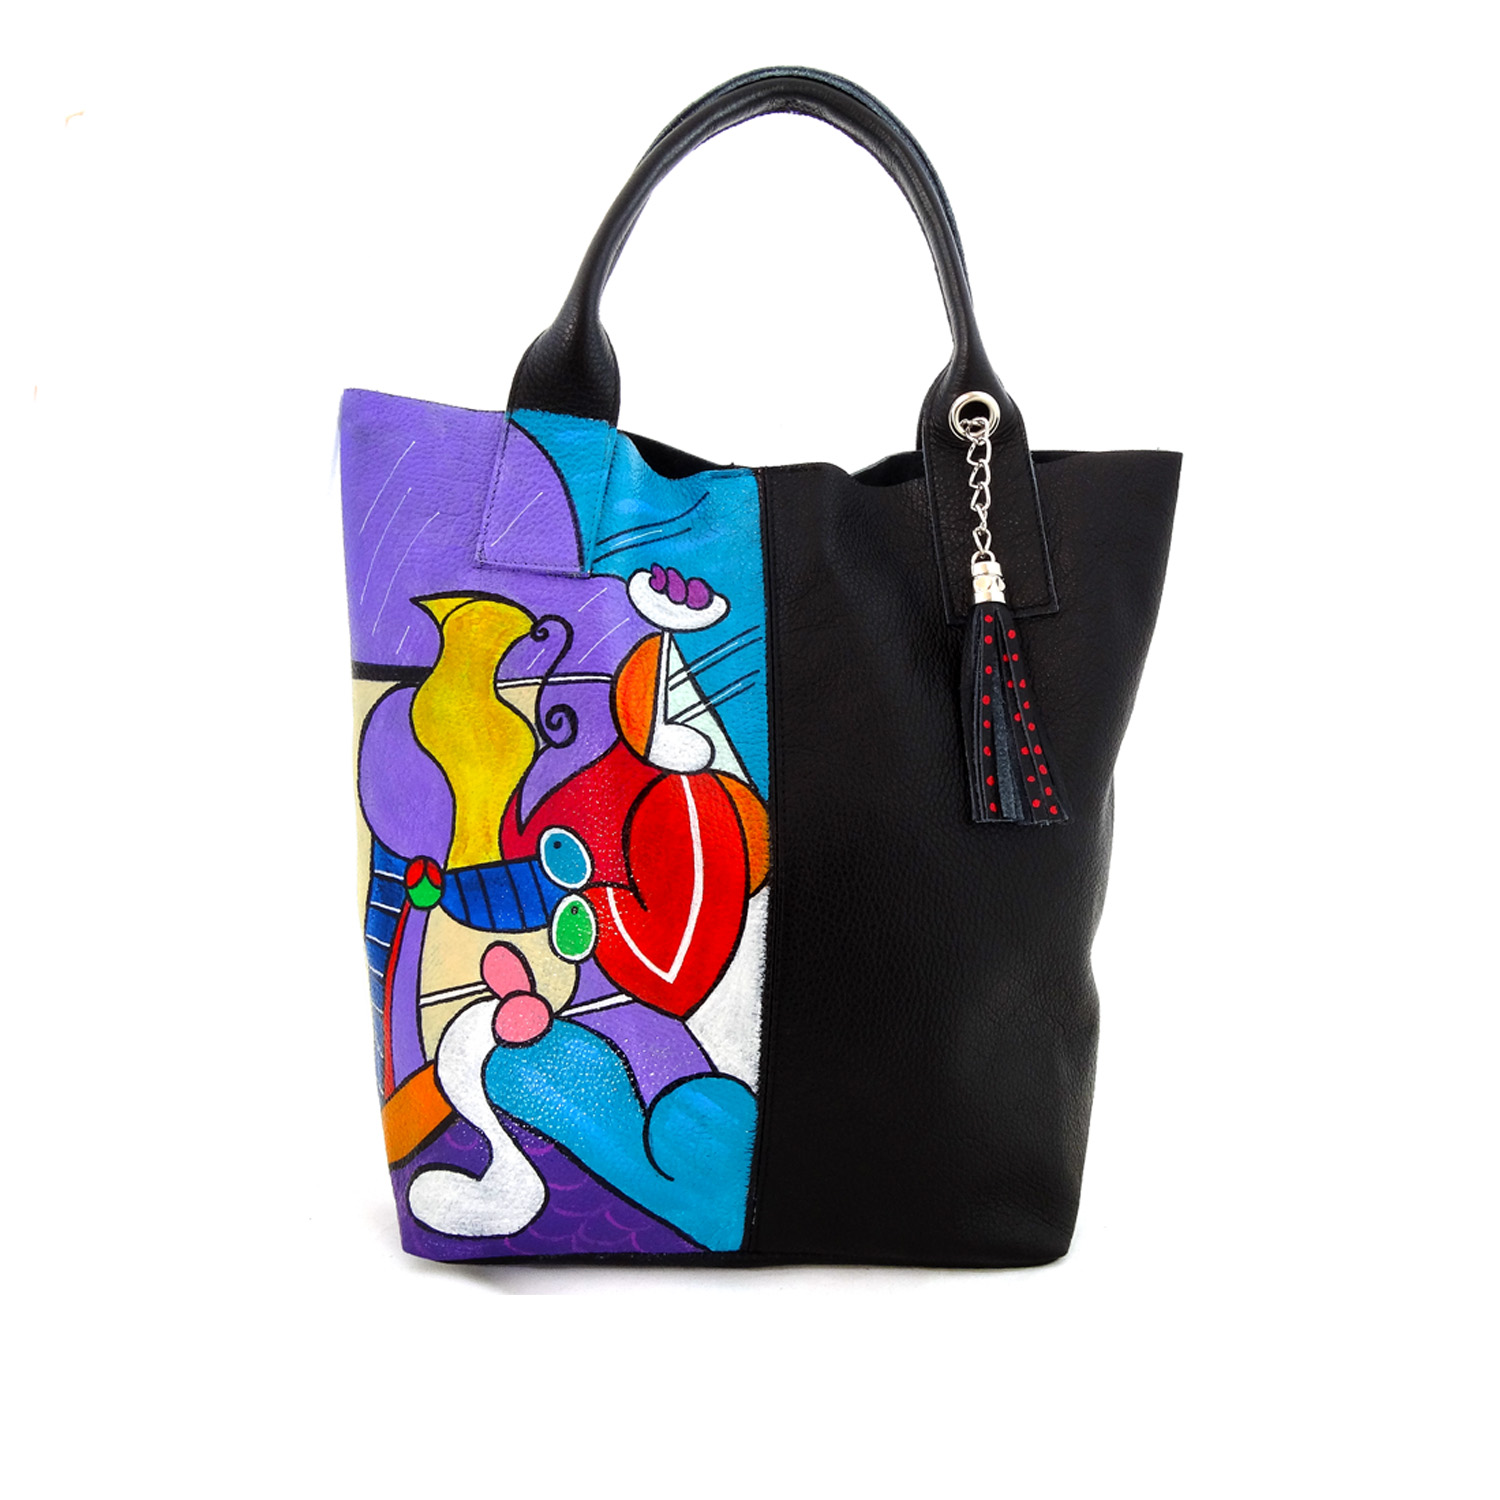 Hand painted bag - Nude with still life by Picasso